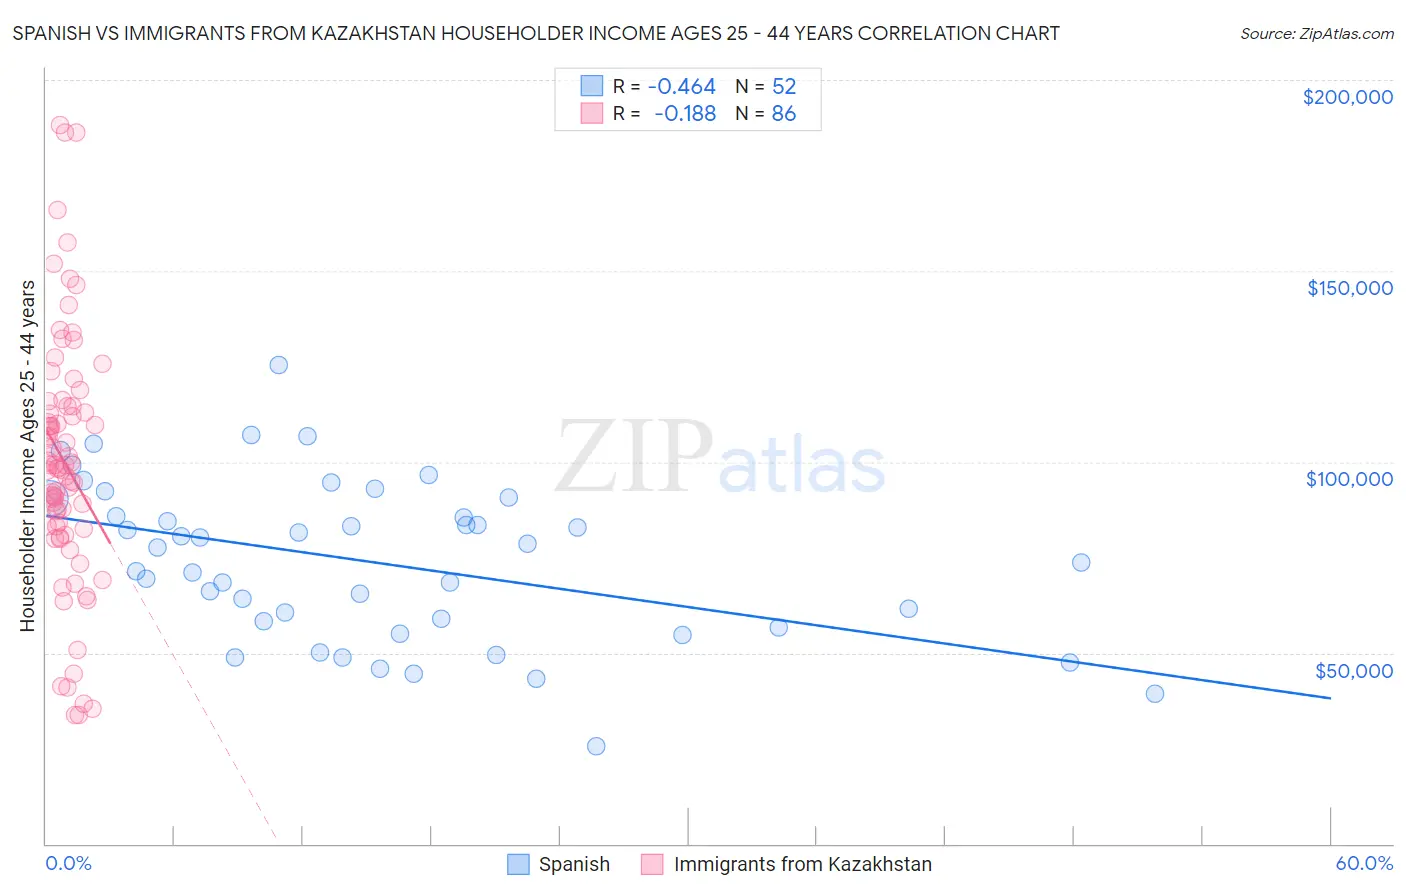 Spanish vs Immigrants from Kazakhstan Householder Income Ages 25 - 44 years